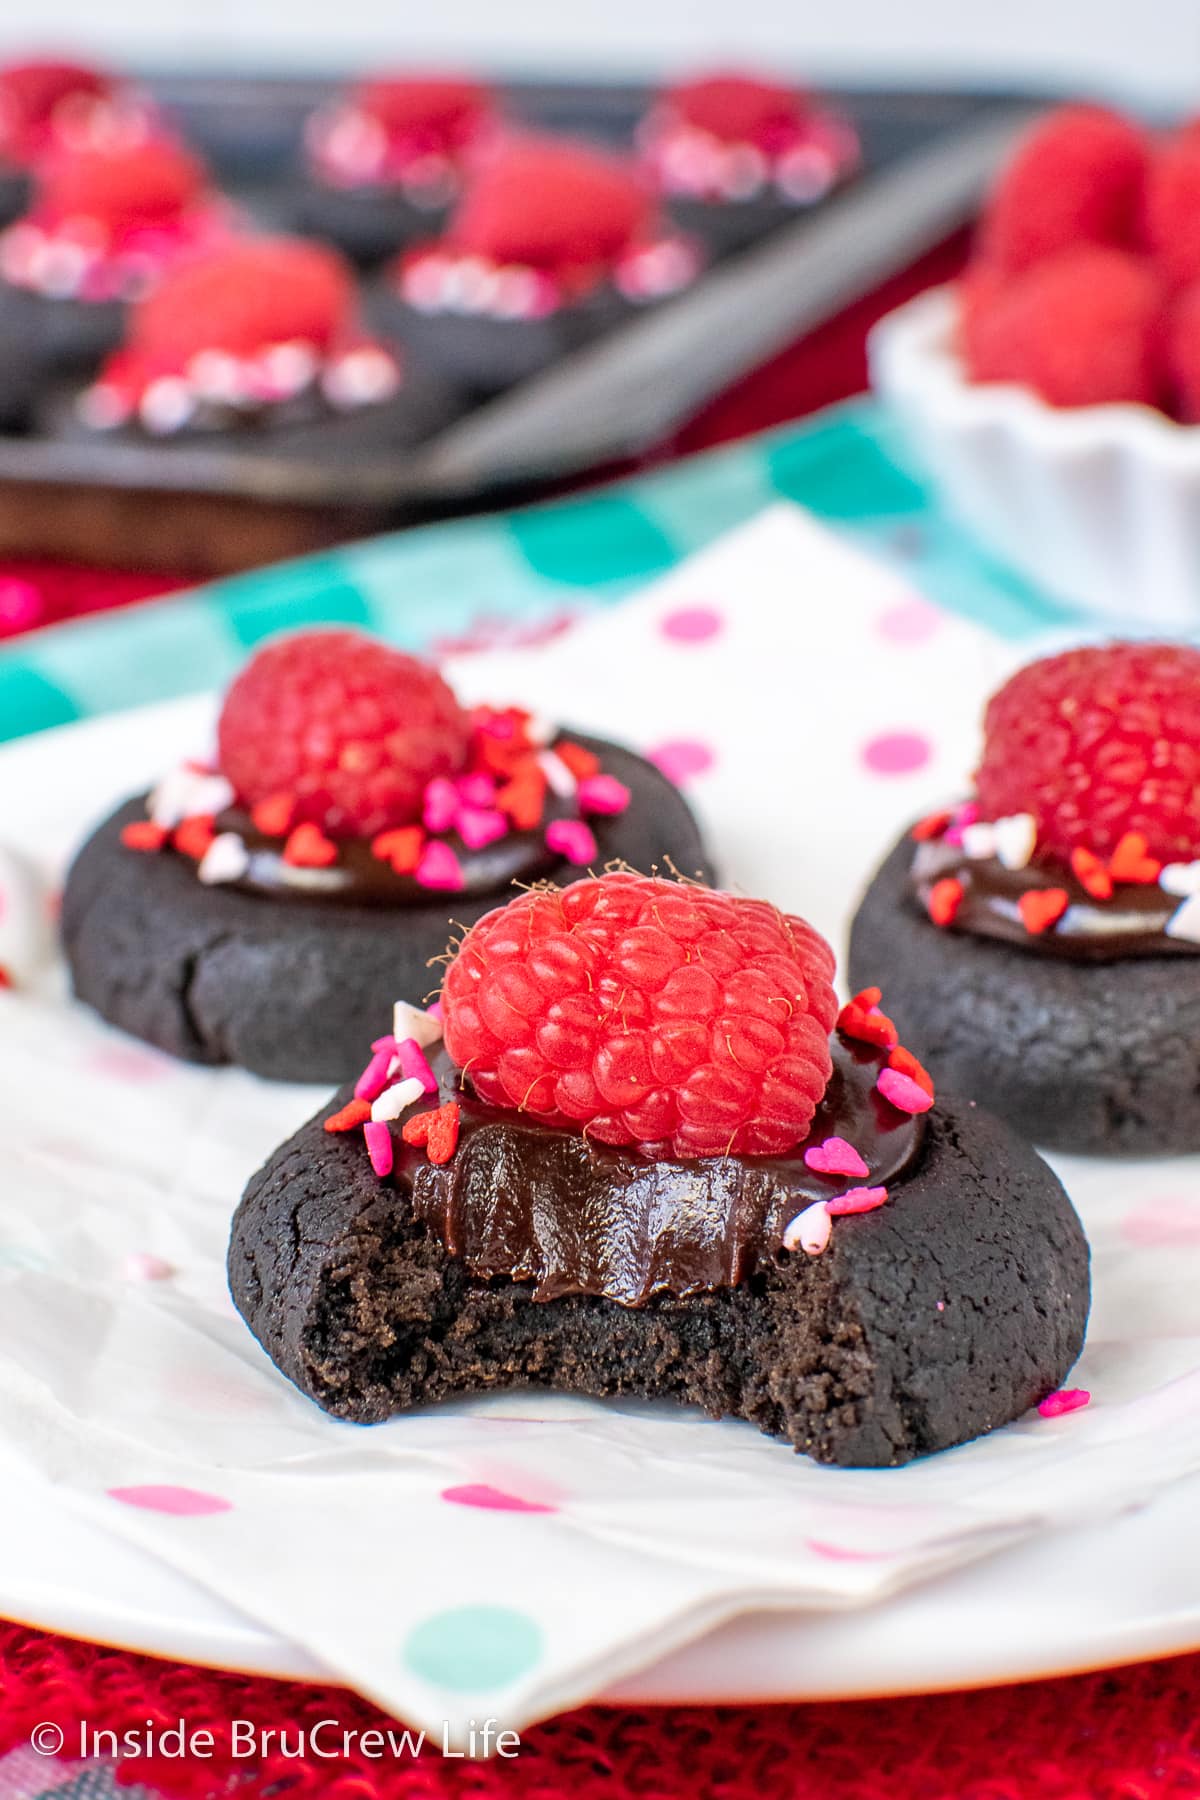 A chocolate thumbprint cookie with a chocolate center and a raspberry on it.